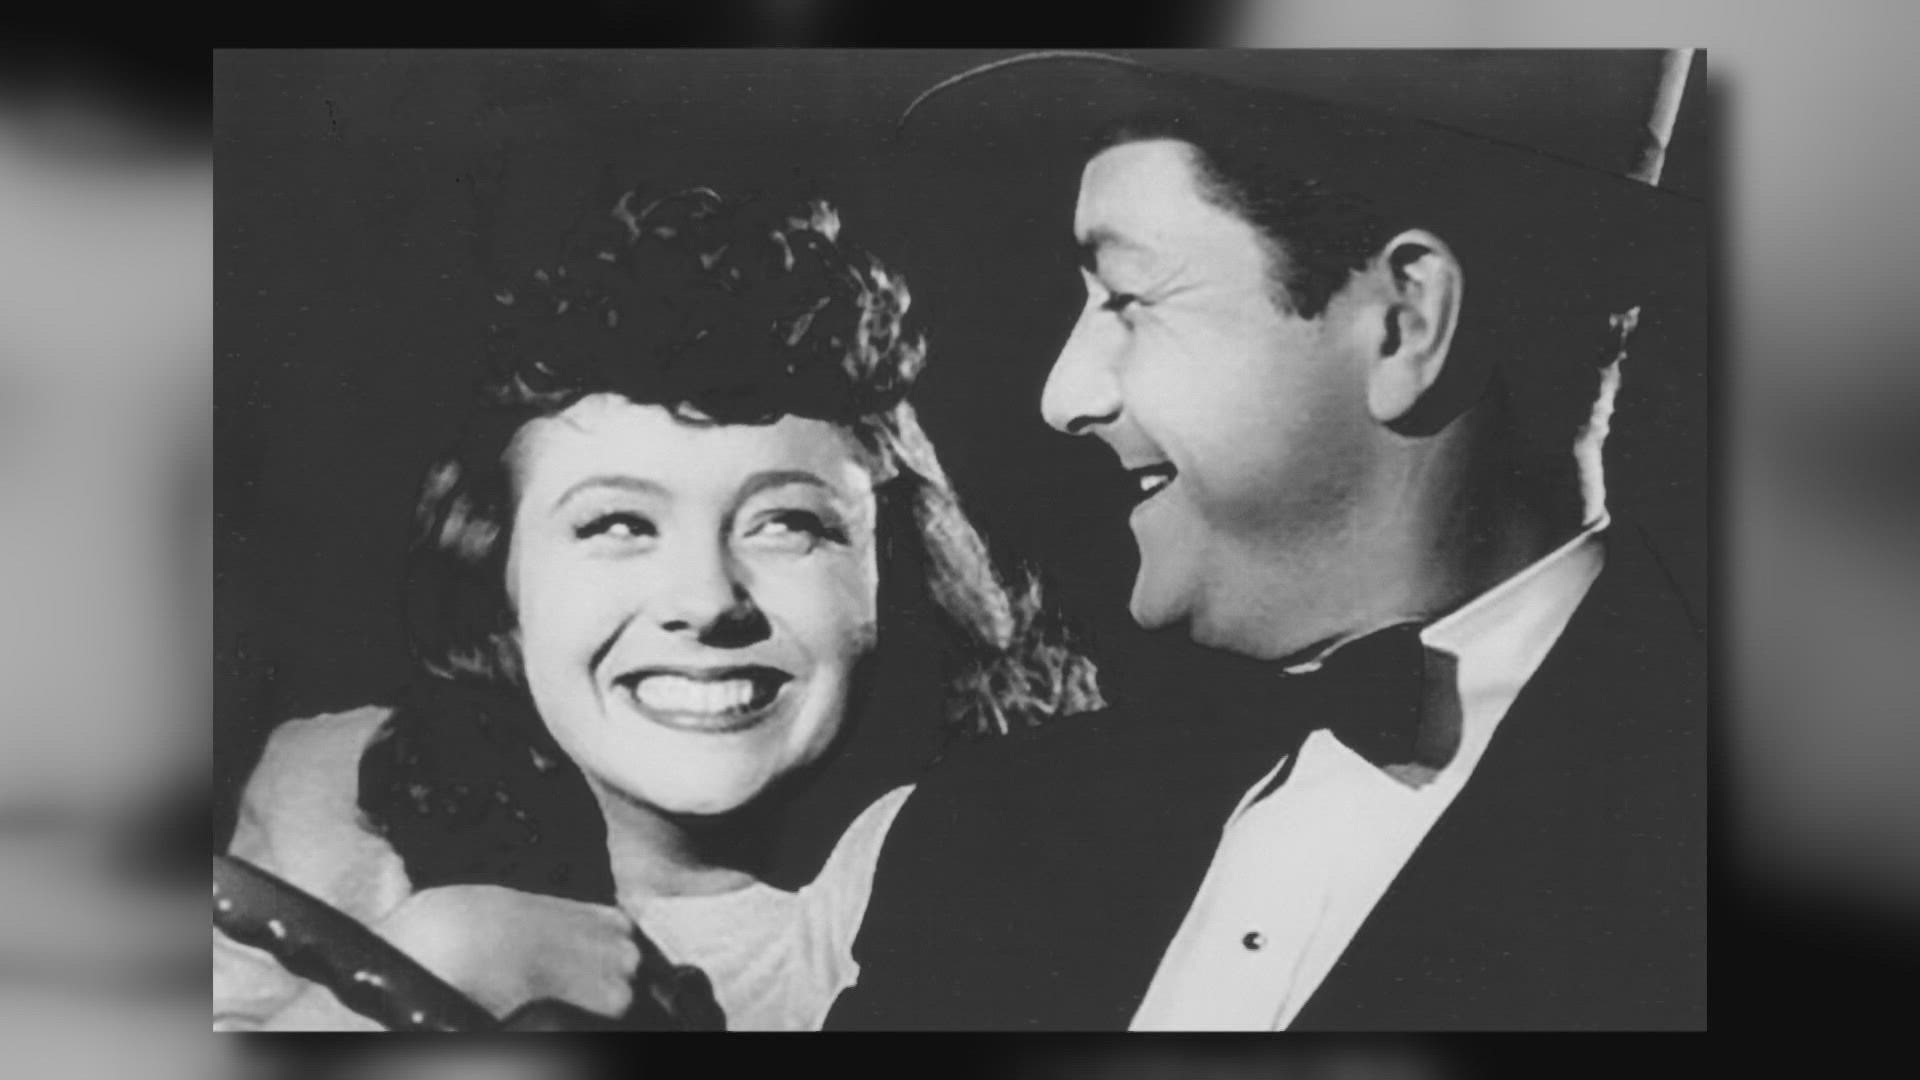 The late actress, known for her iconic role on The Andy Griffith Show, gives us a behind-the-scenes look at her life.